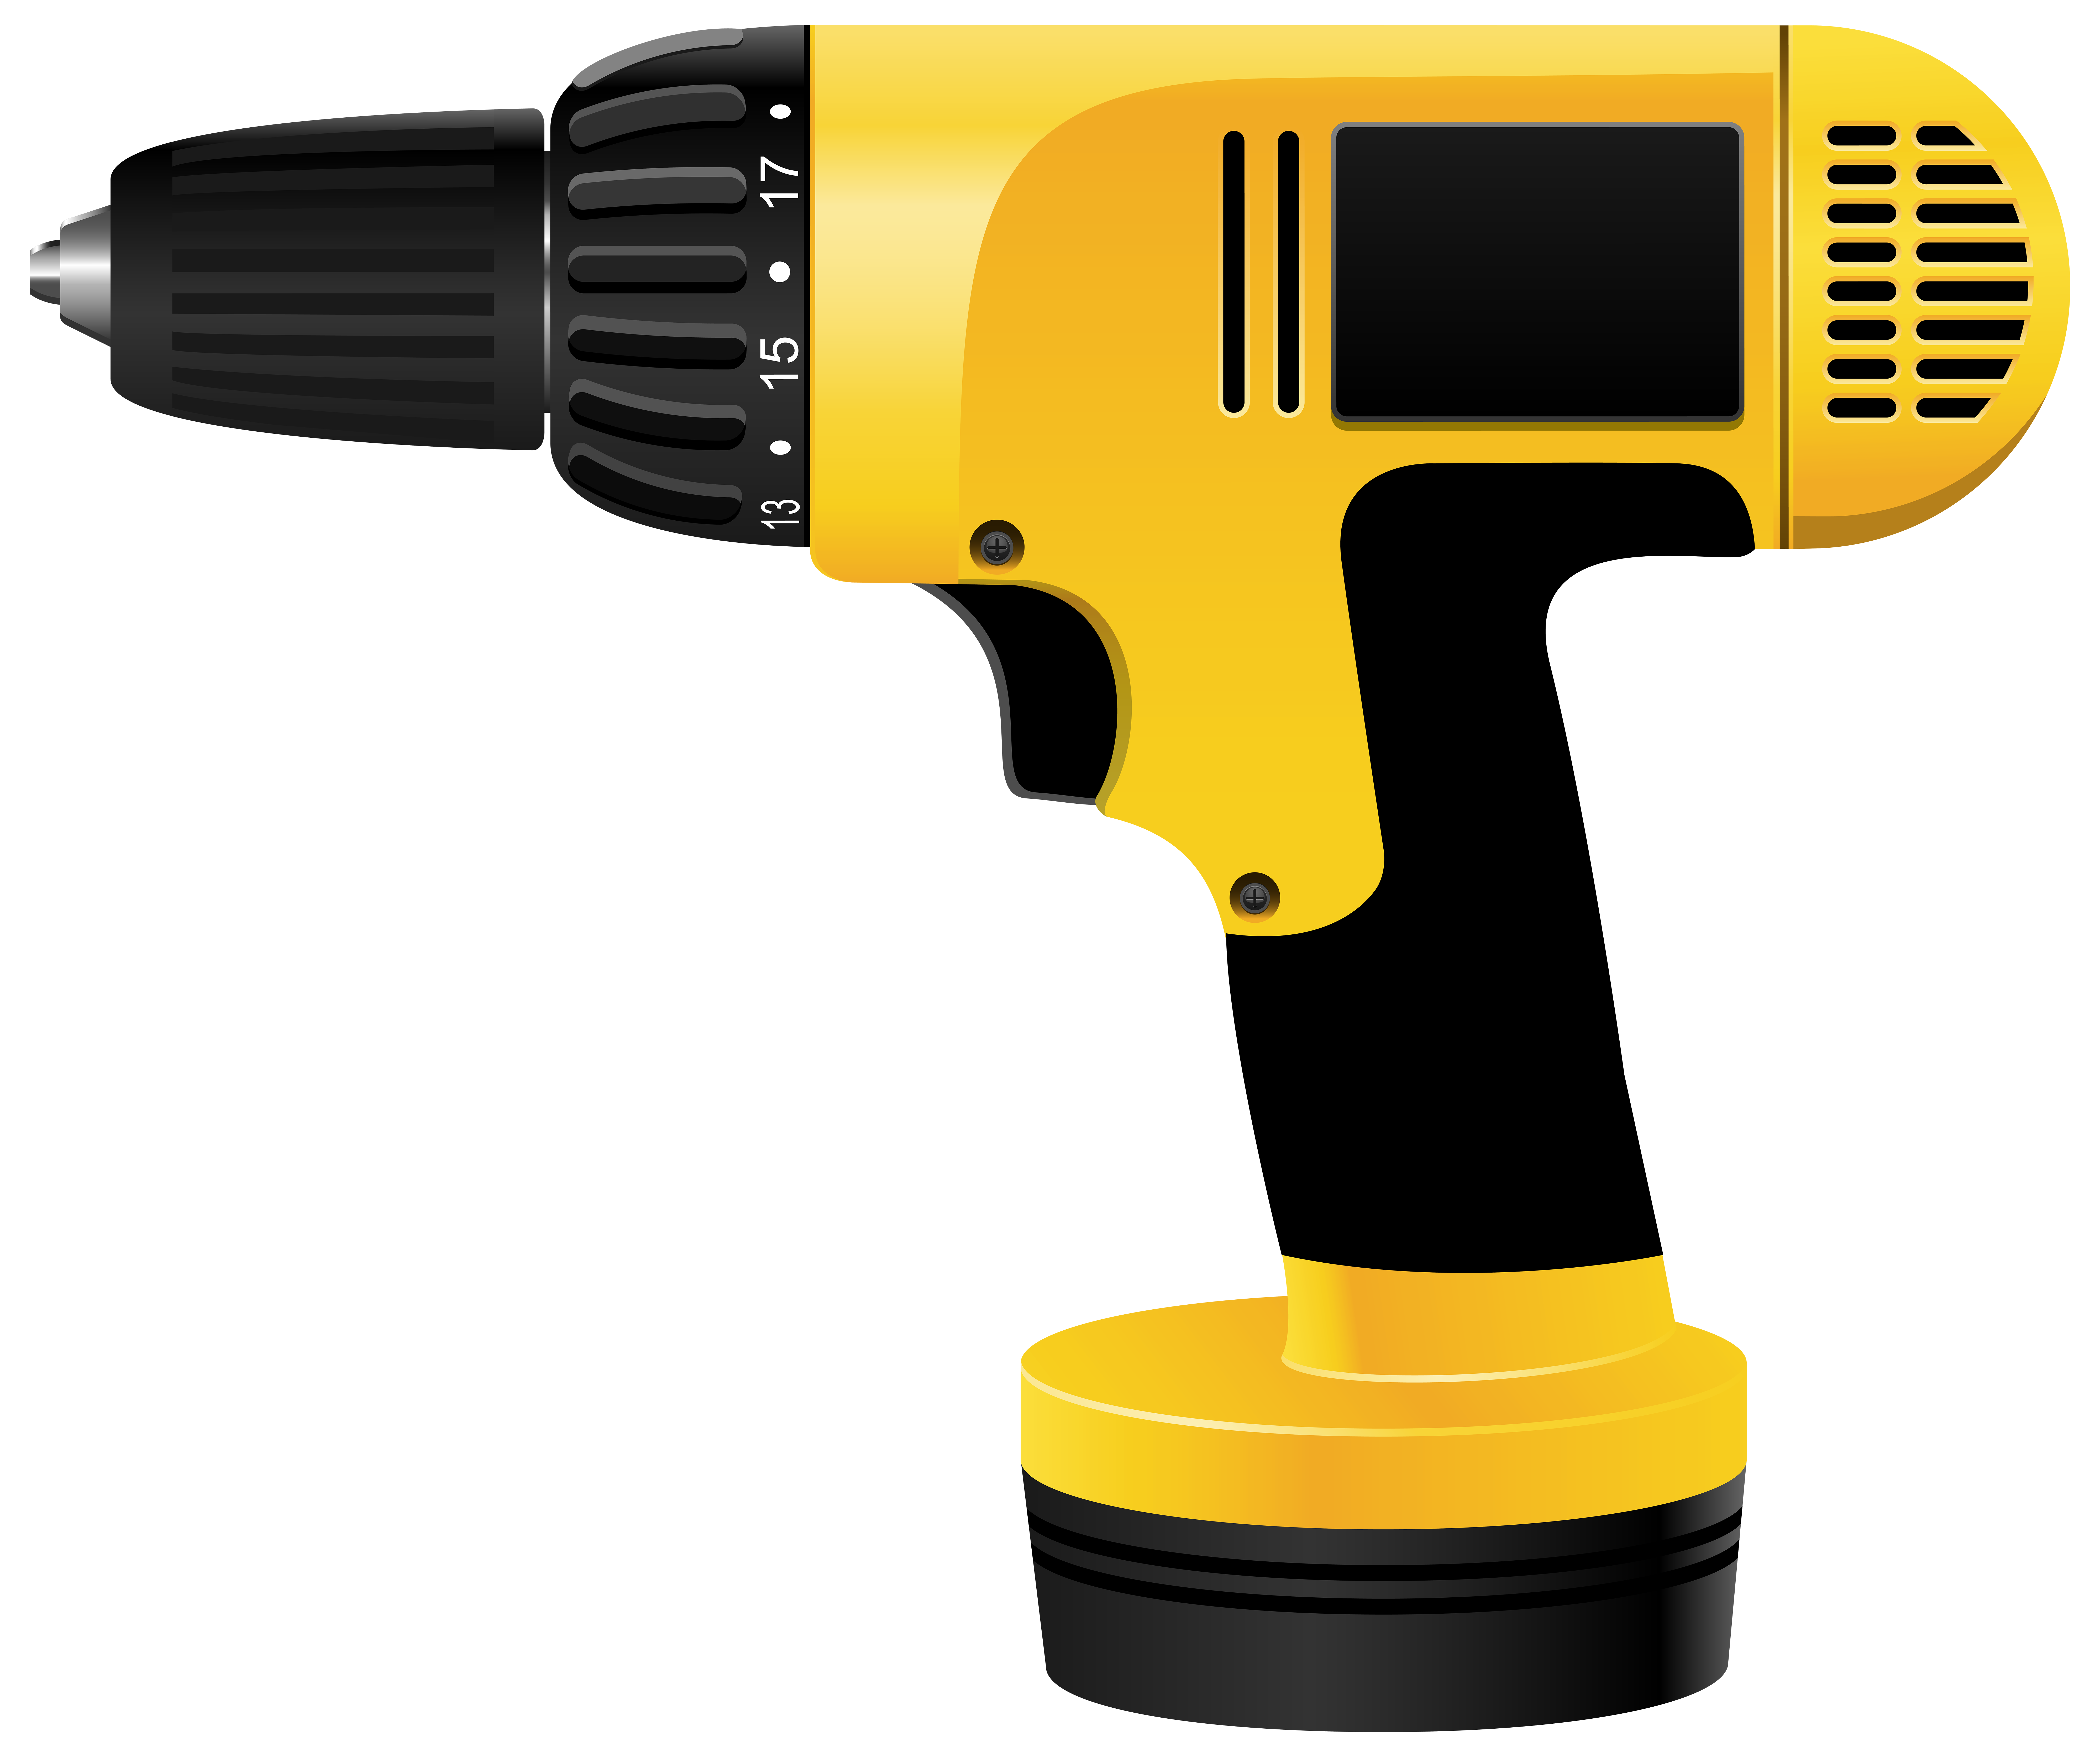 Wireless electric screwdriver Royalty Free Vector Image